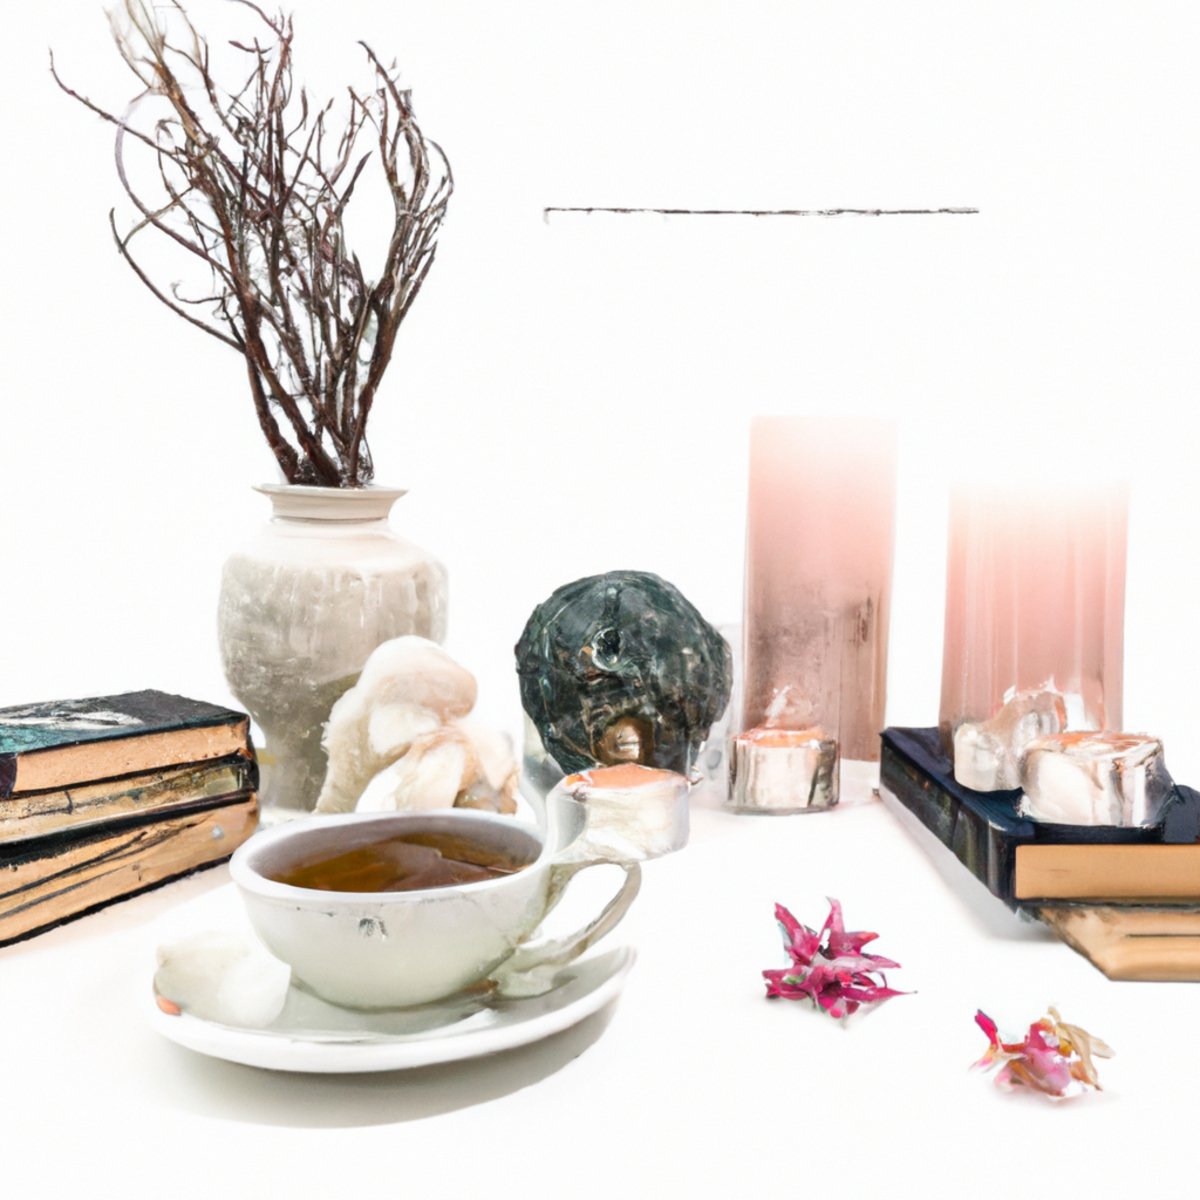 A serene display of self-care: teacup, candles, flowers, blanket. A tranquil scene promoting relaxation and rejuvenation - Inner beauty